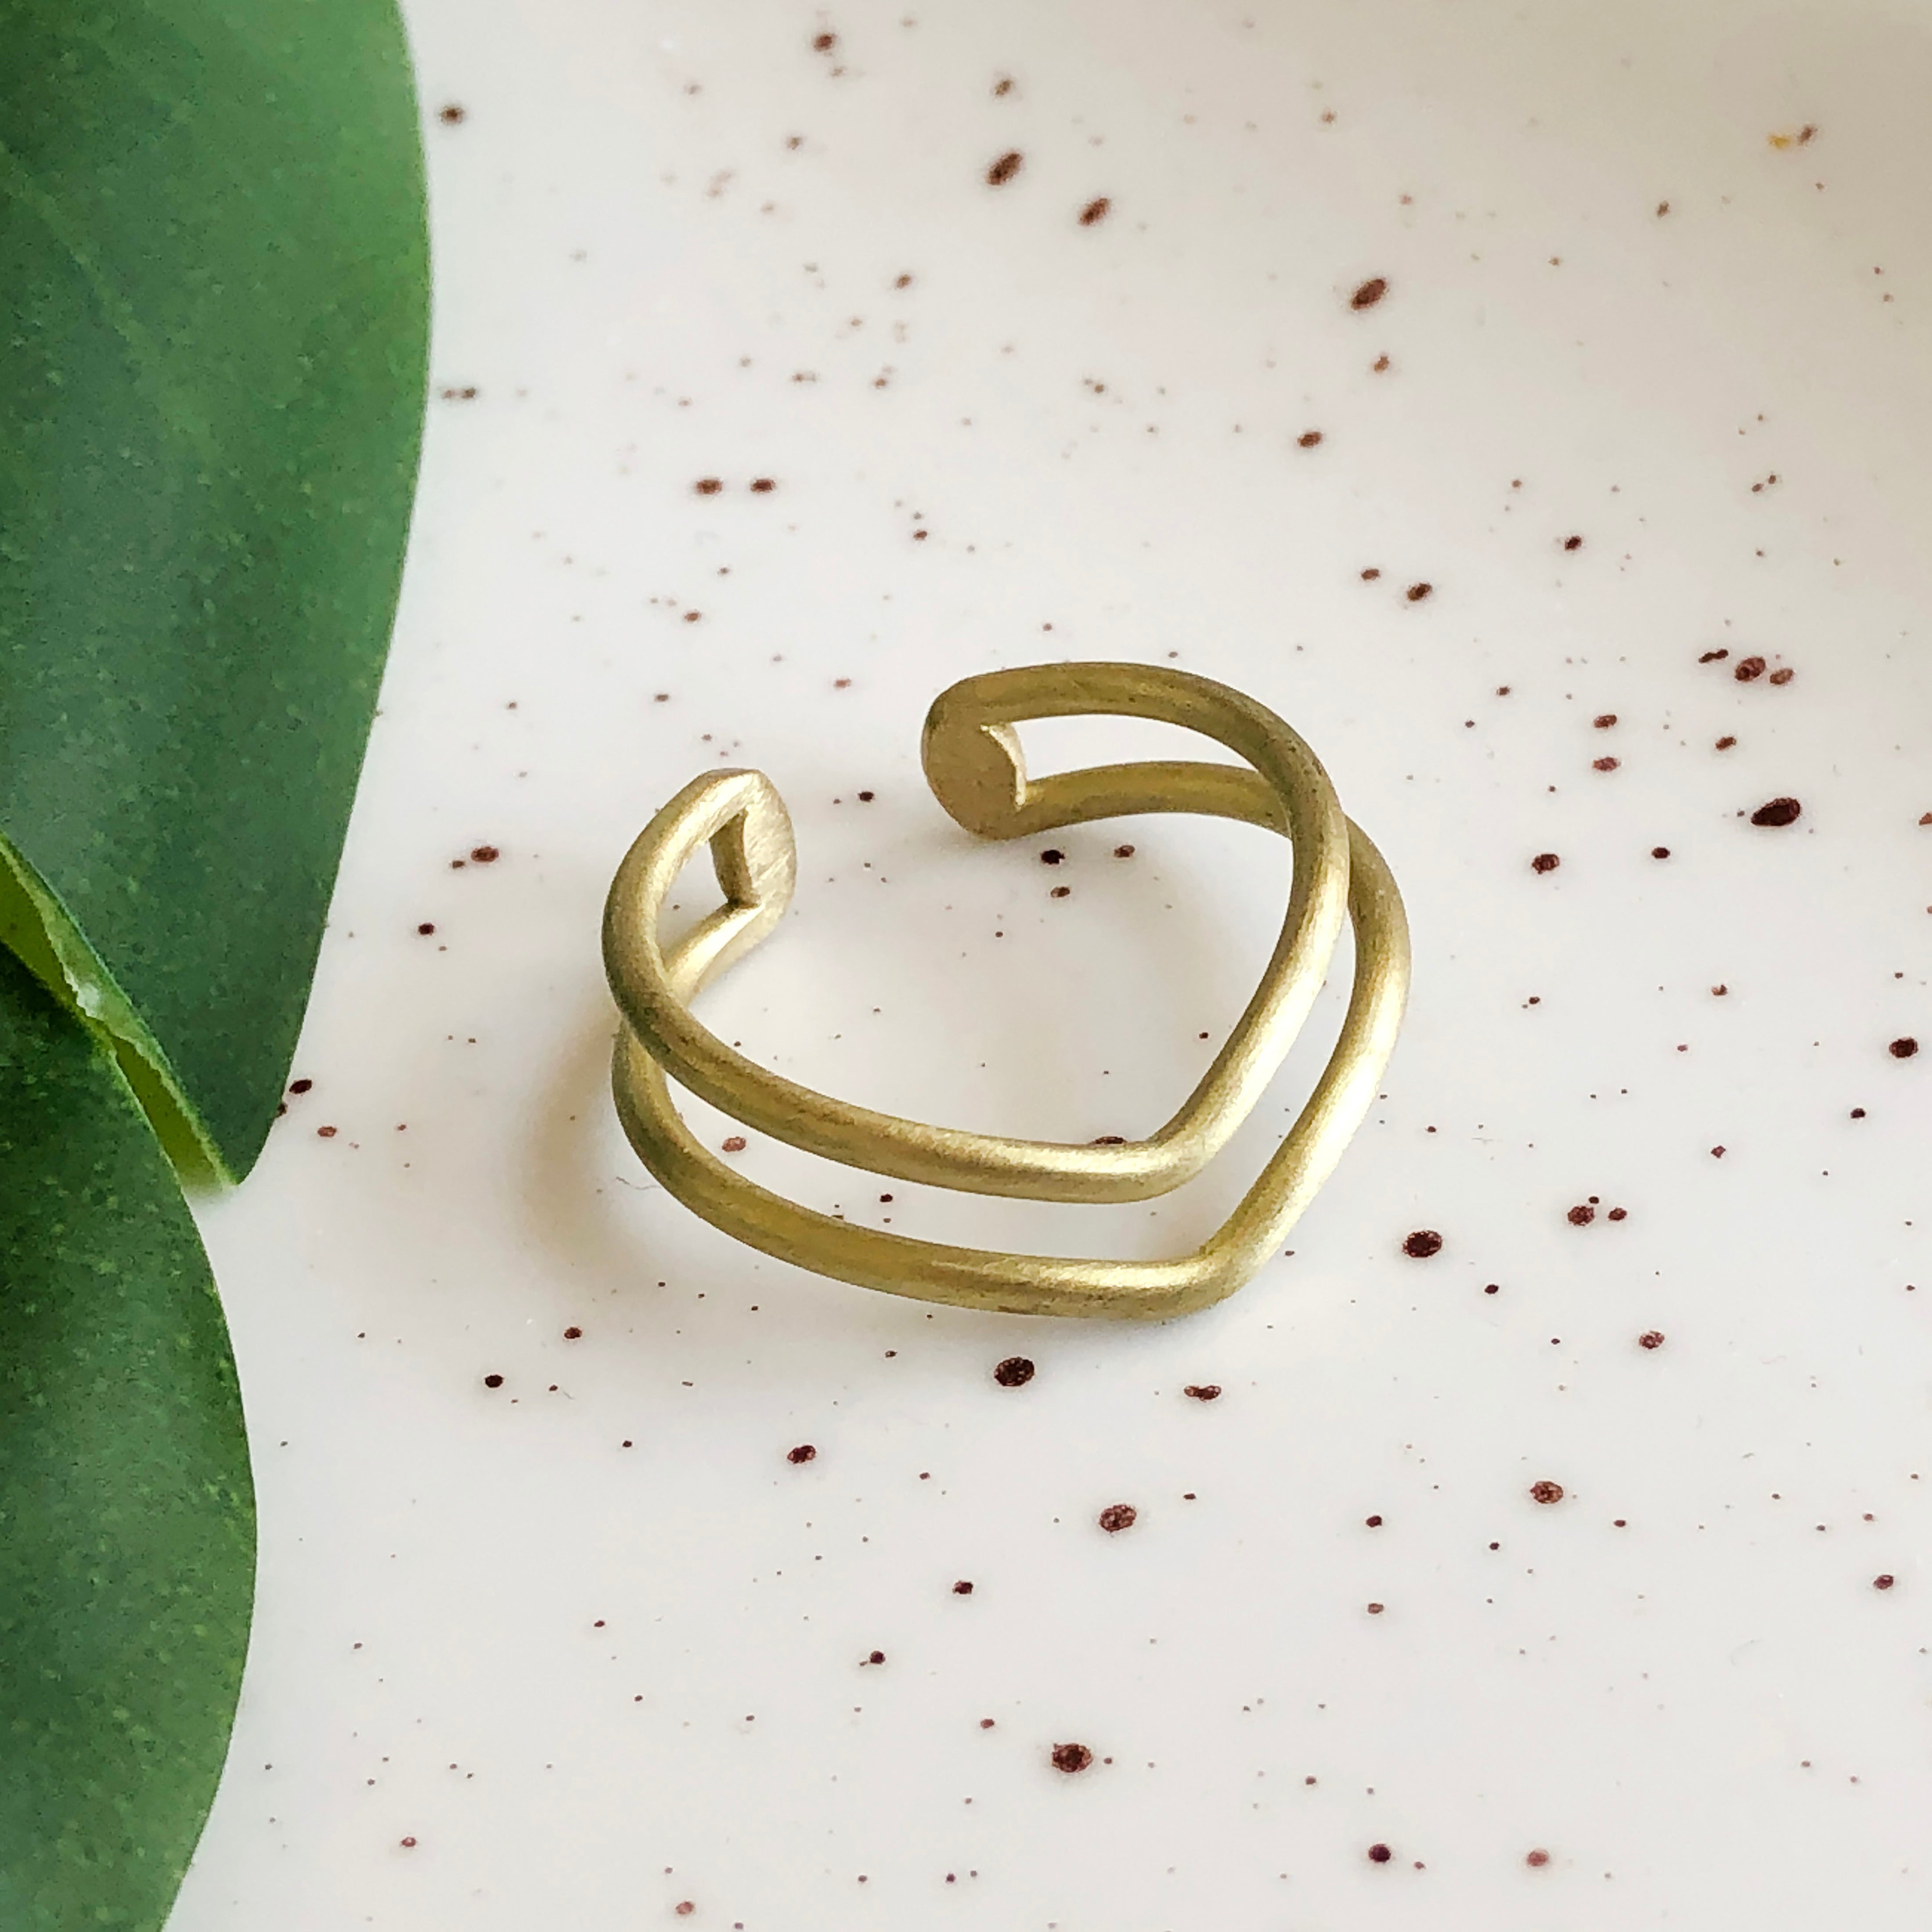 A single gold ring formed with two parallel V shapes rests on a speckled background.